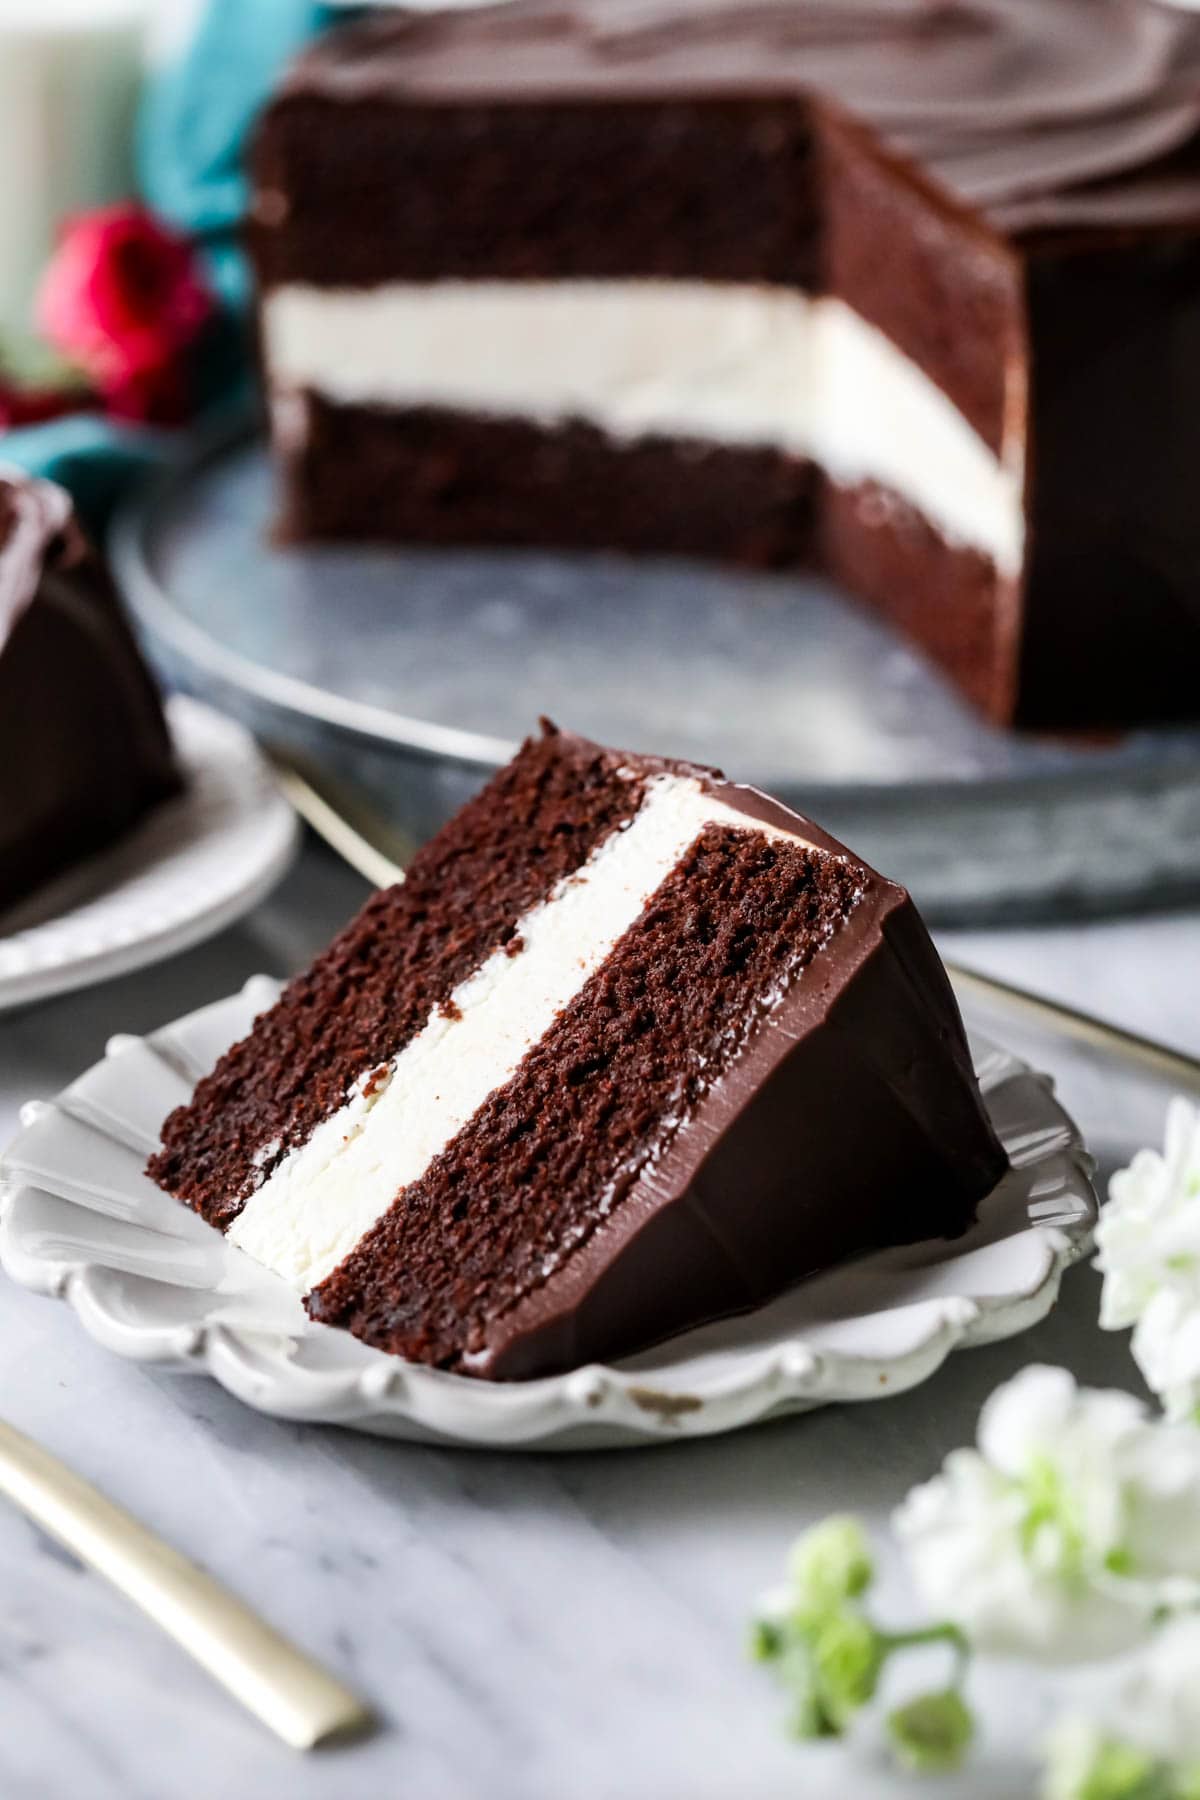 Slice of cake made with chocolate cake layers, a creamy ermine filling, and chocolate ganache topping.